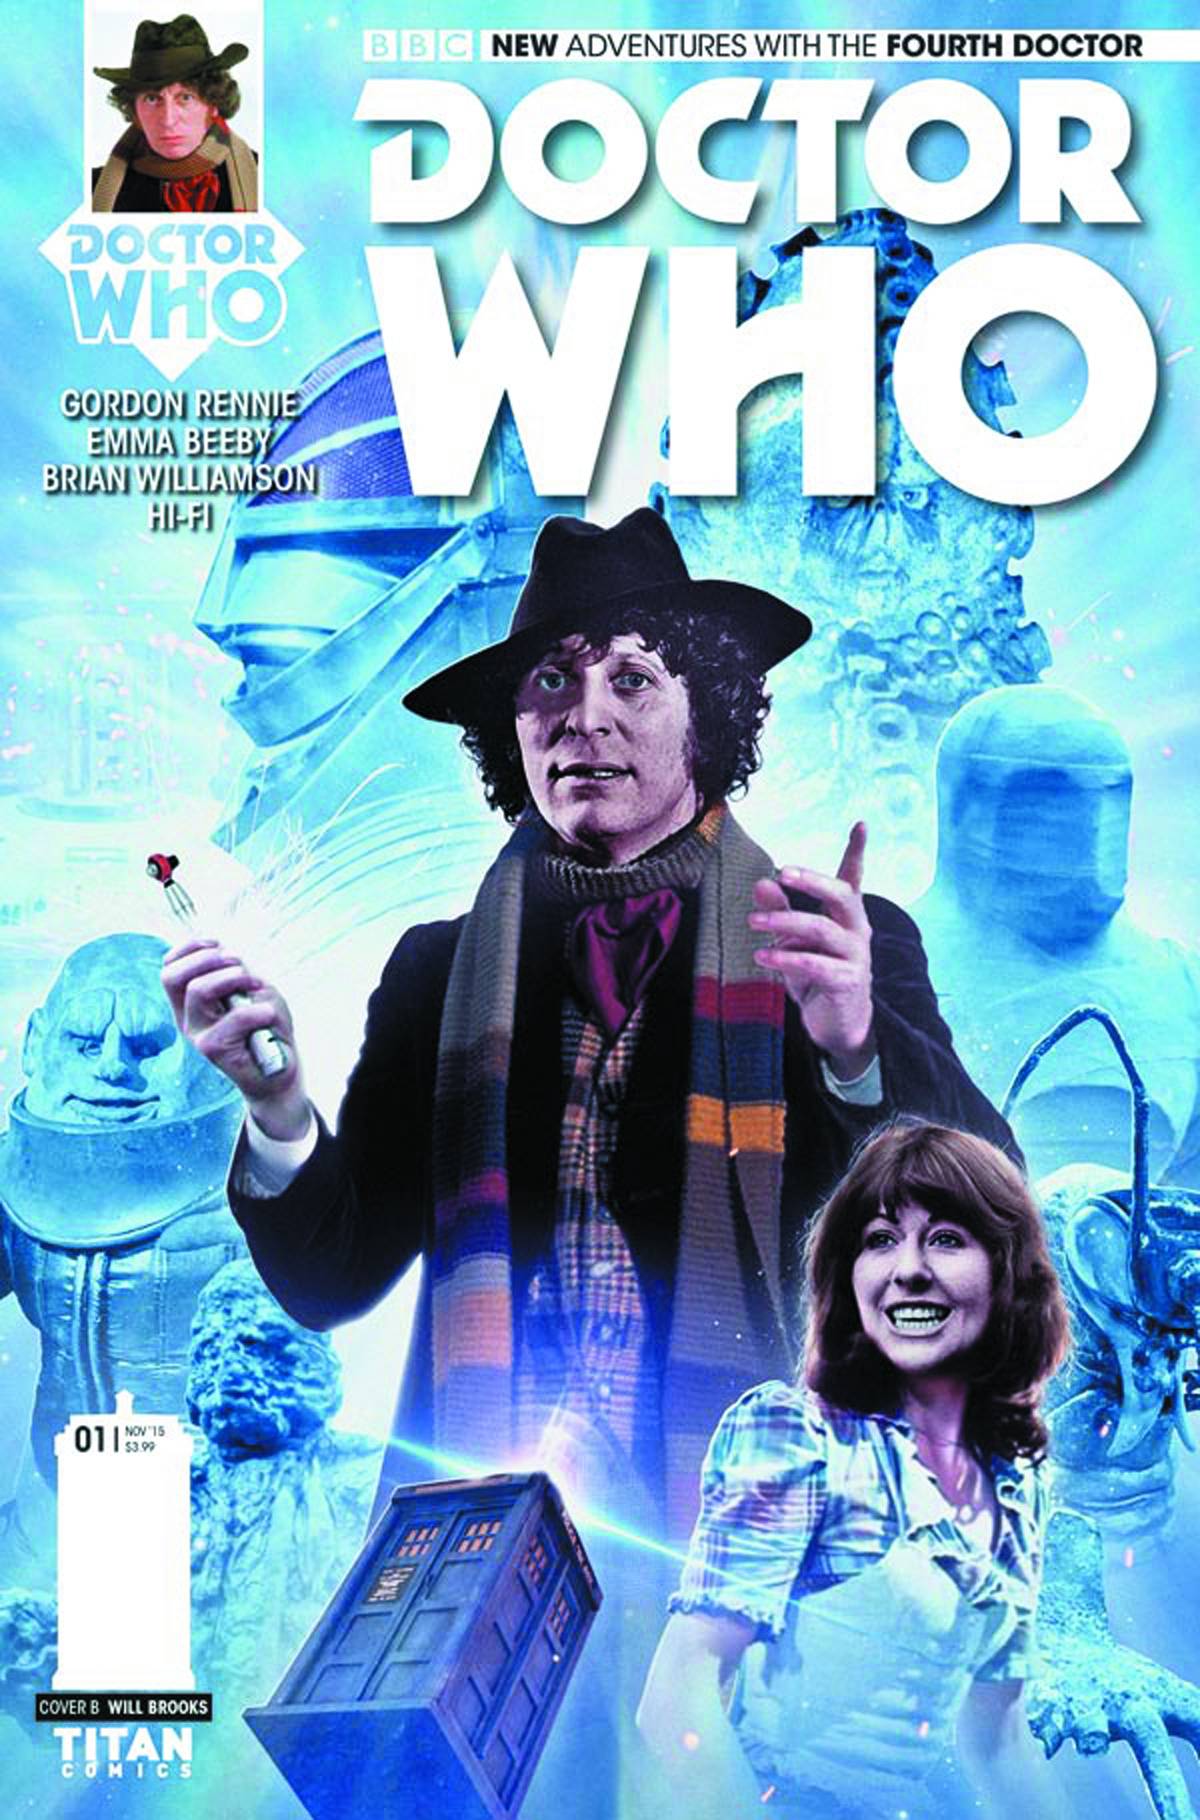 Doctor Who 4th #1 Cover B Photo